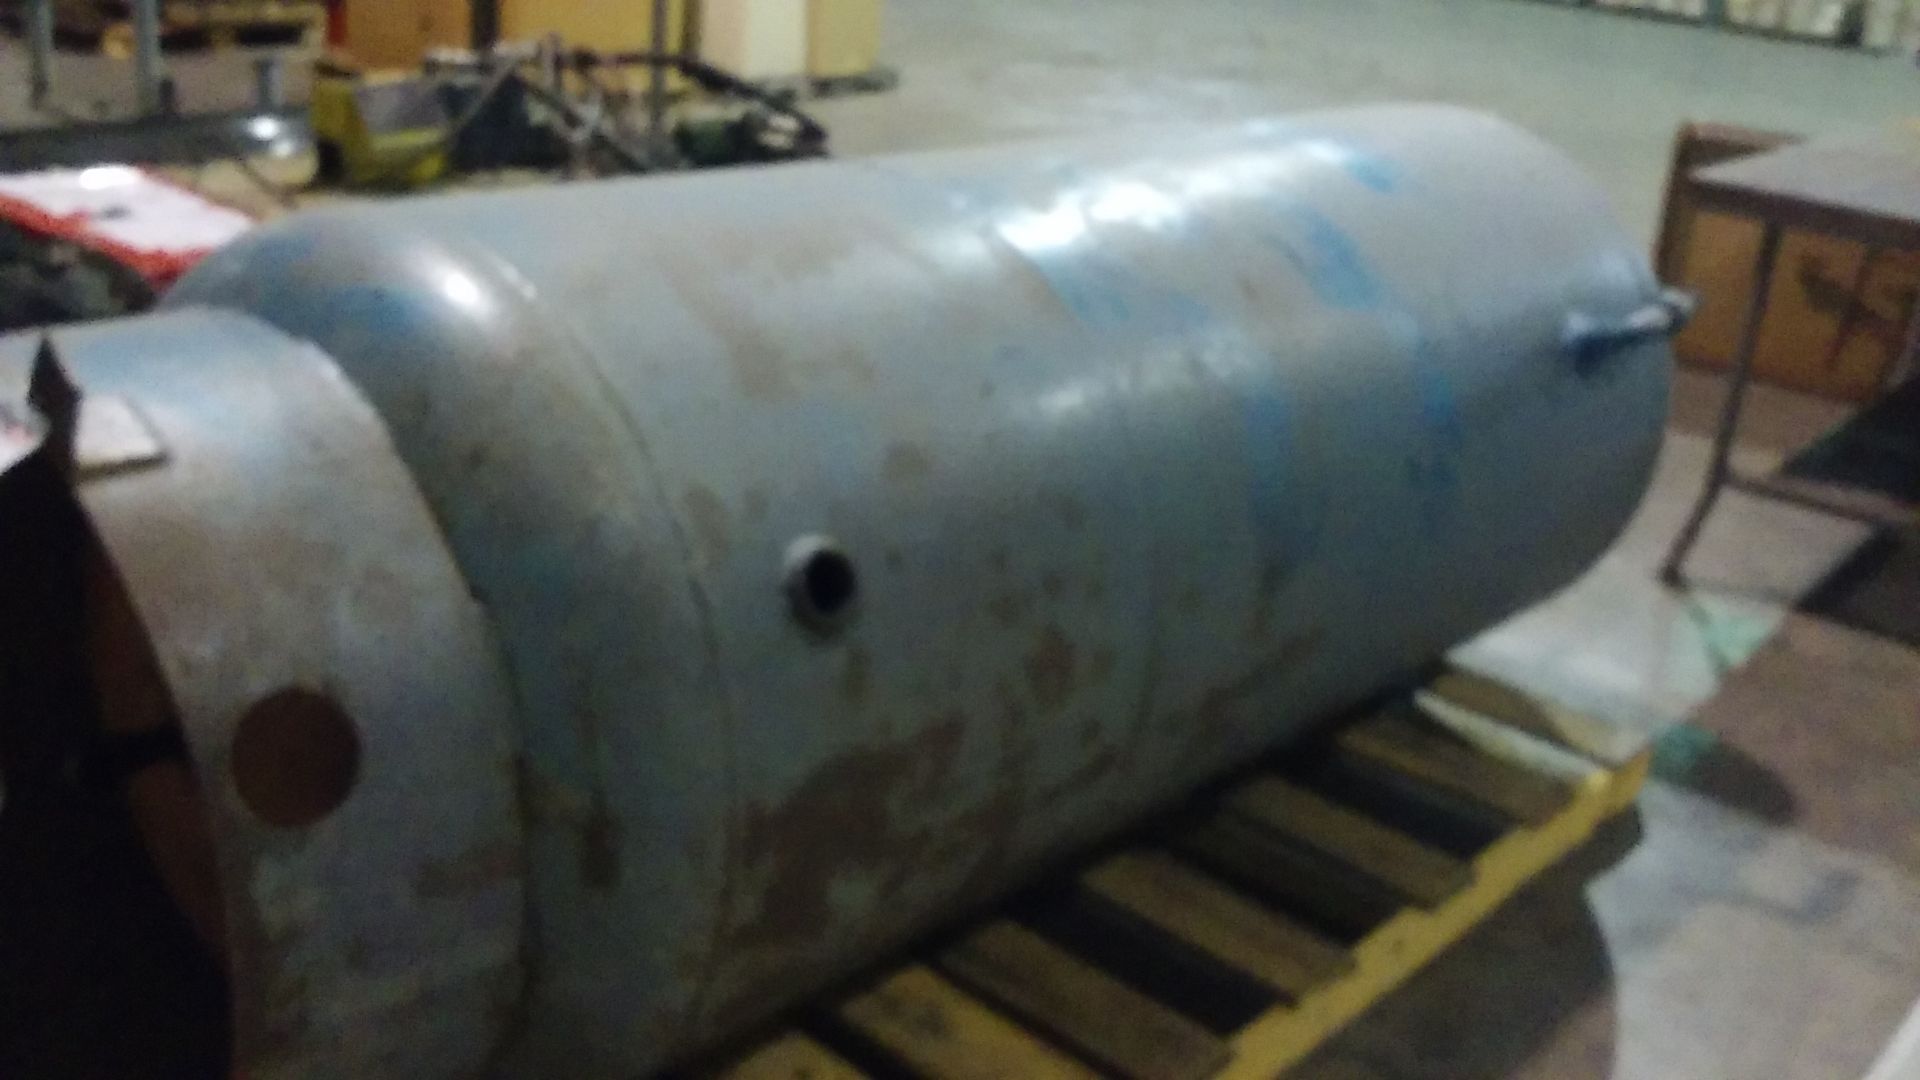 LARGE AIR TANK FOR BLOW MOLD MACHINE